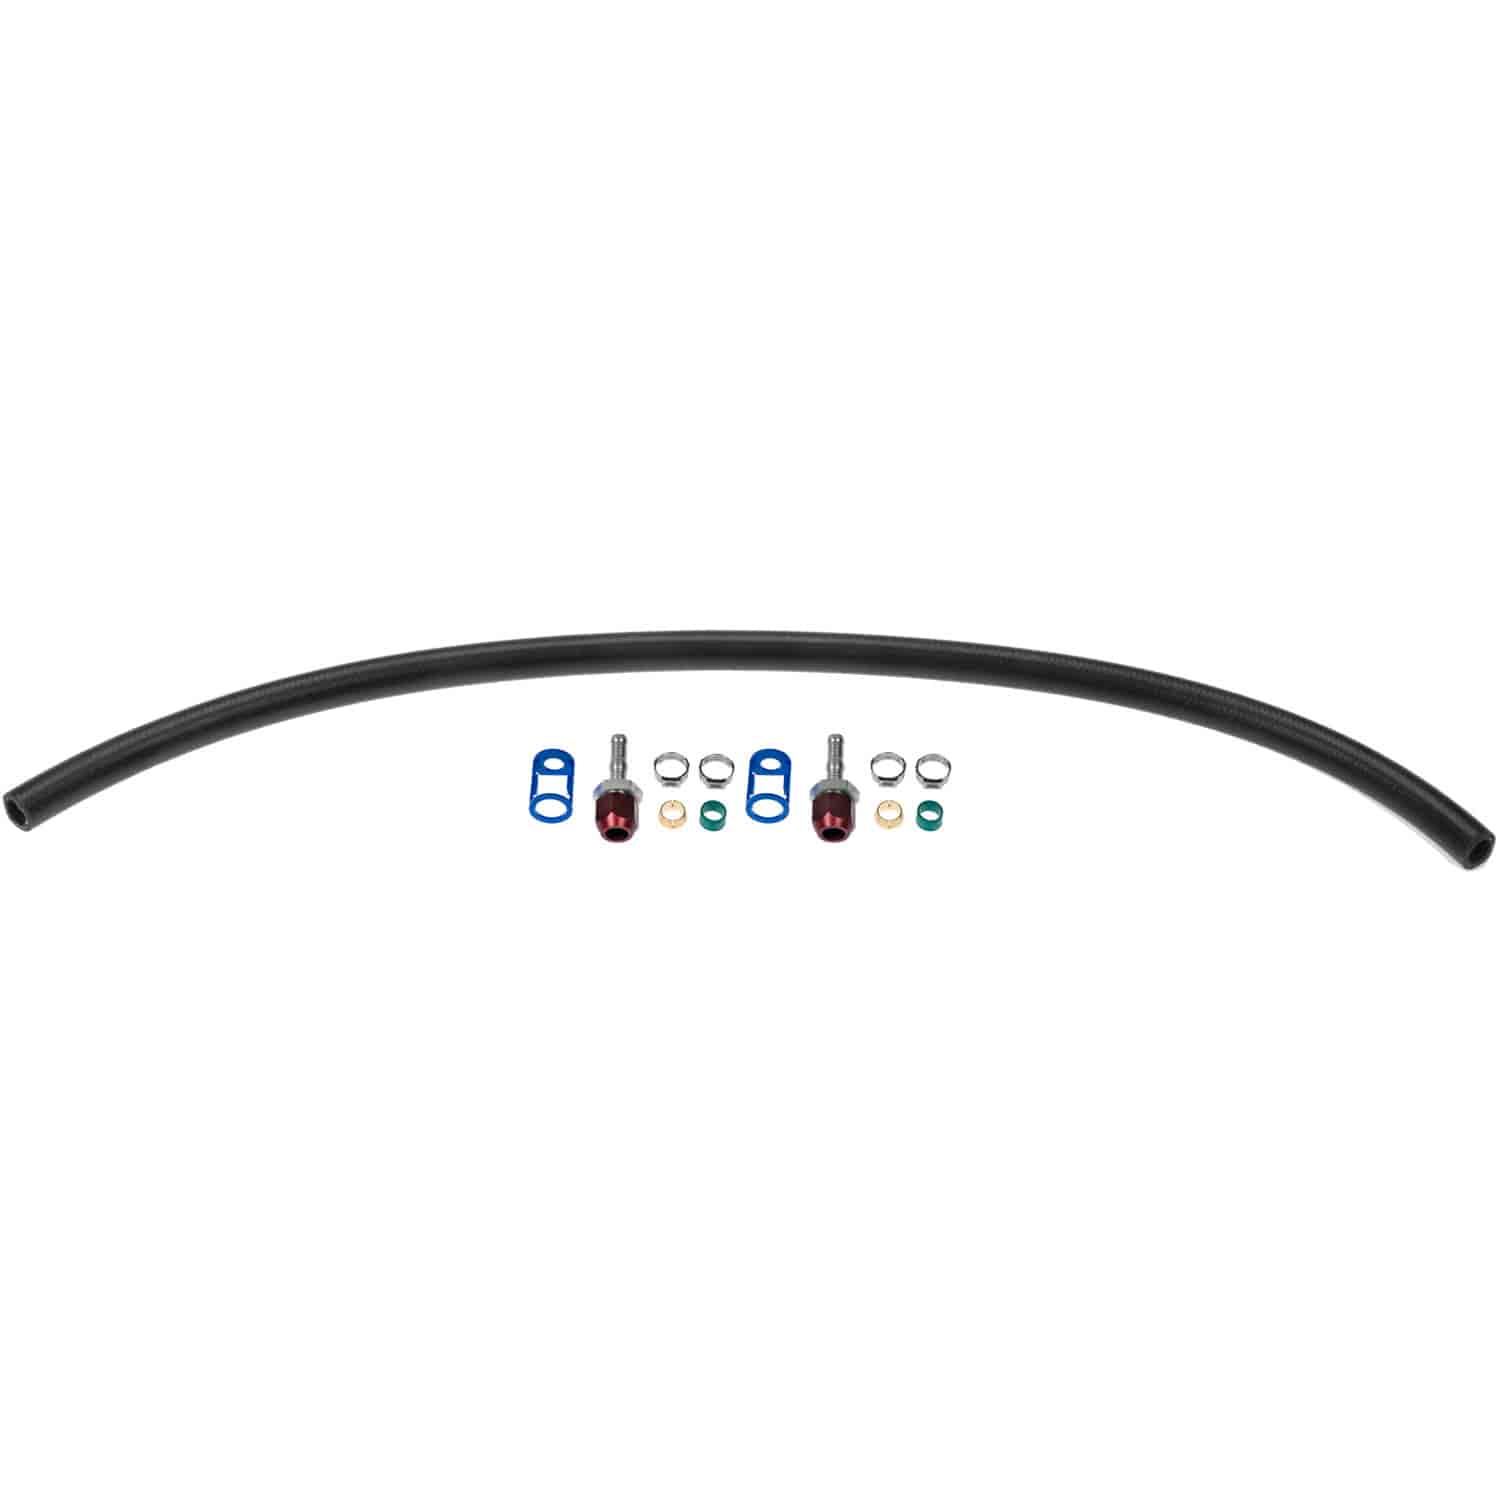 A/C Line Splice Kit for 5/16 Line With #6 Hose